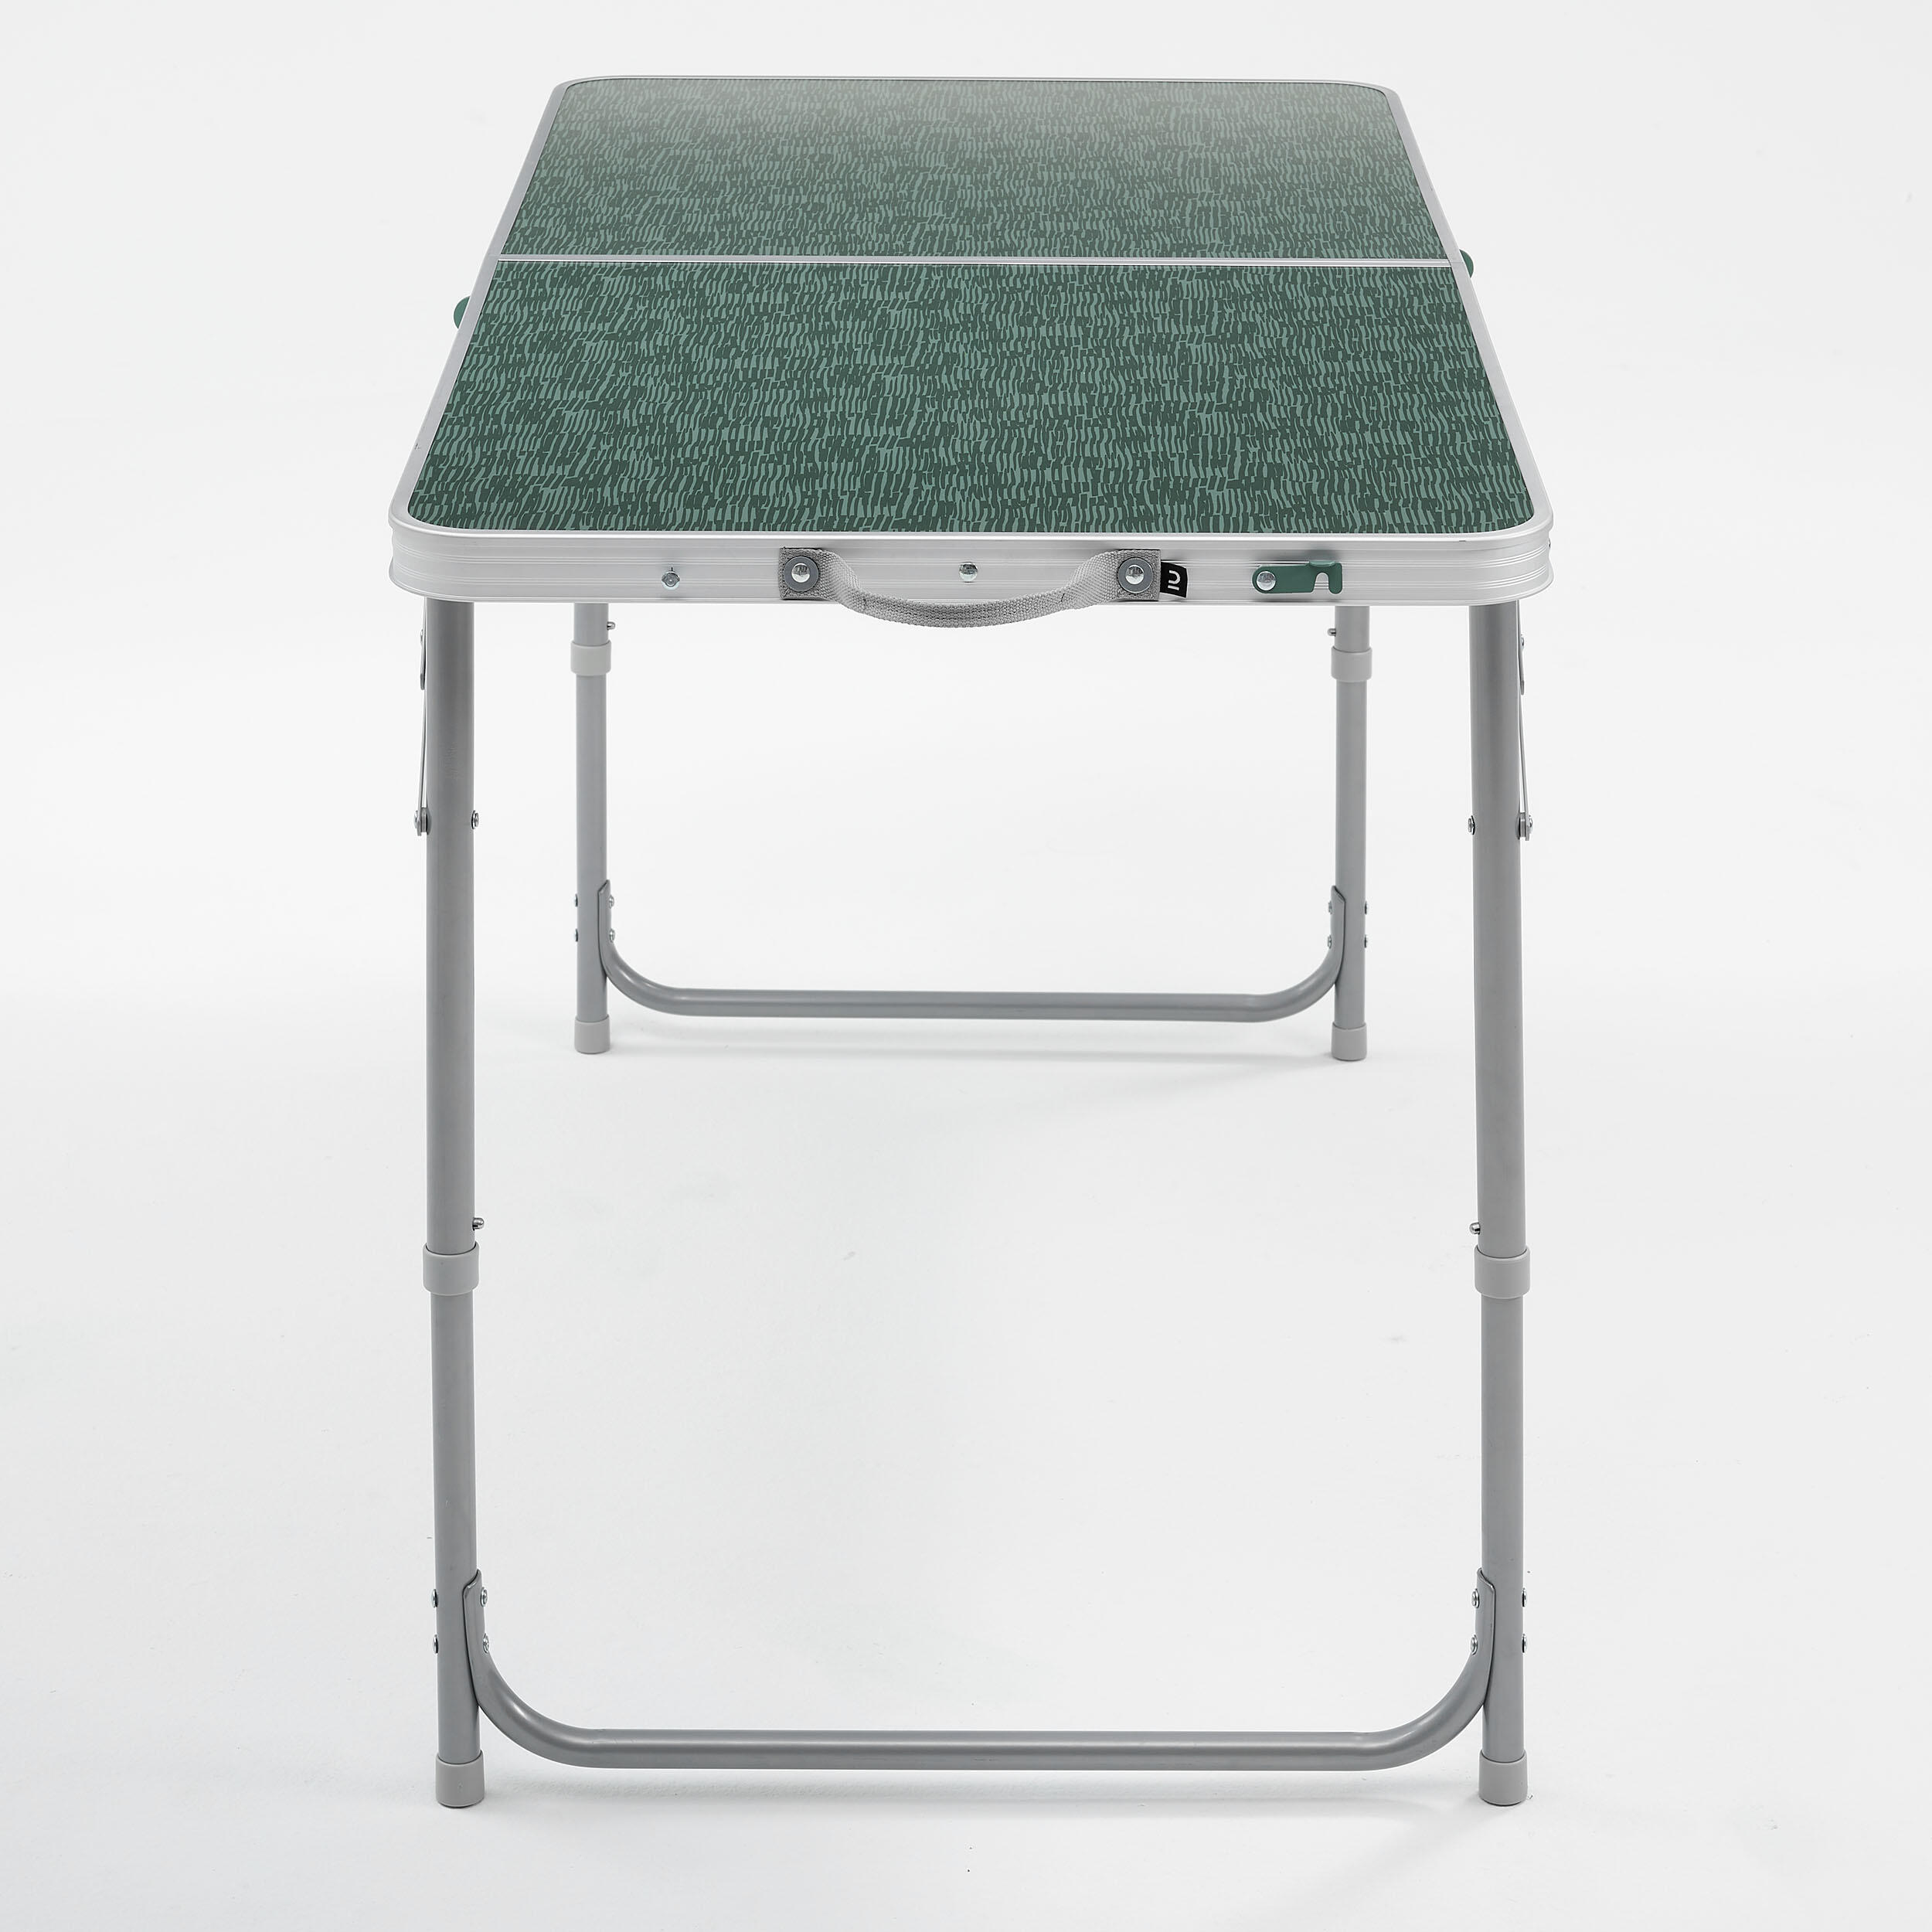 FOLDING CAMPING TABLE - 4 TO 6 PEOPLE 5/10